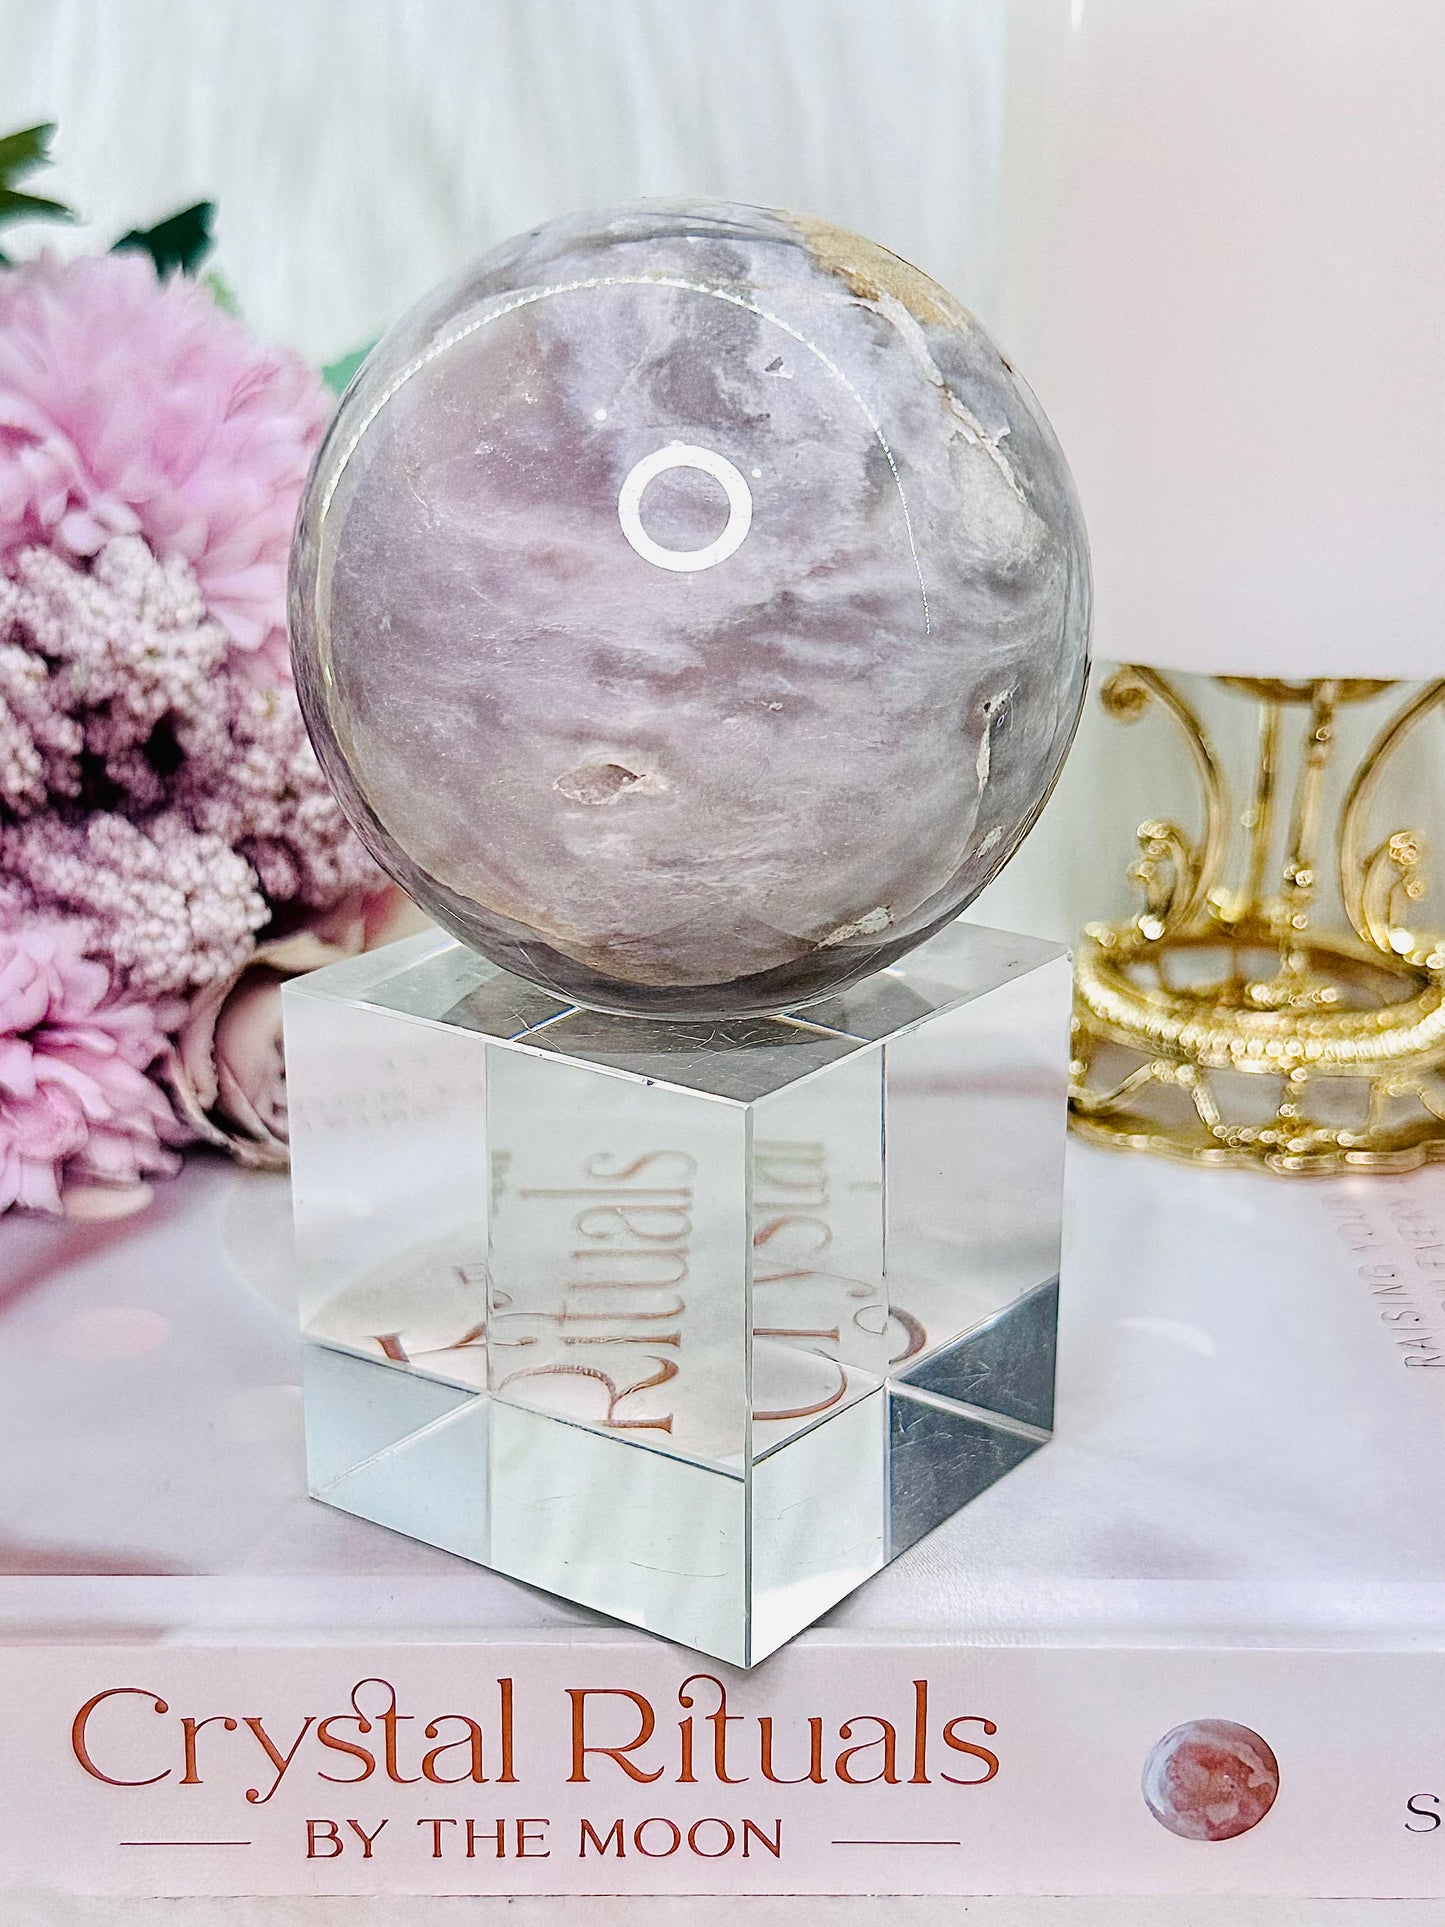 So Unique!! Divine Large 408gram Pink Amethyst Sphere On Stand From Brazil (Glass stand in pic is display only)